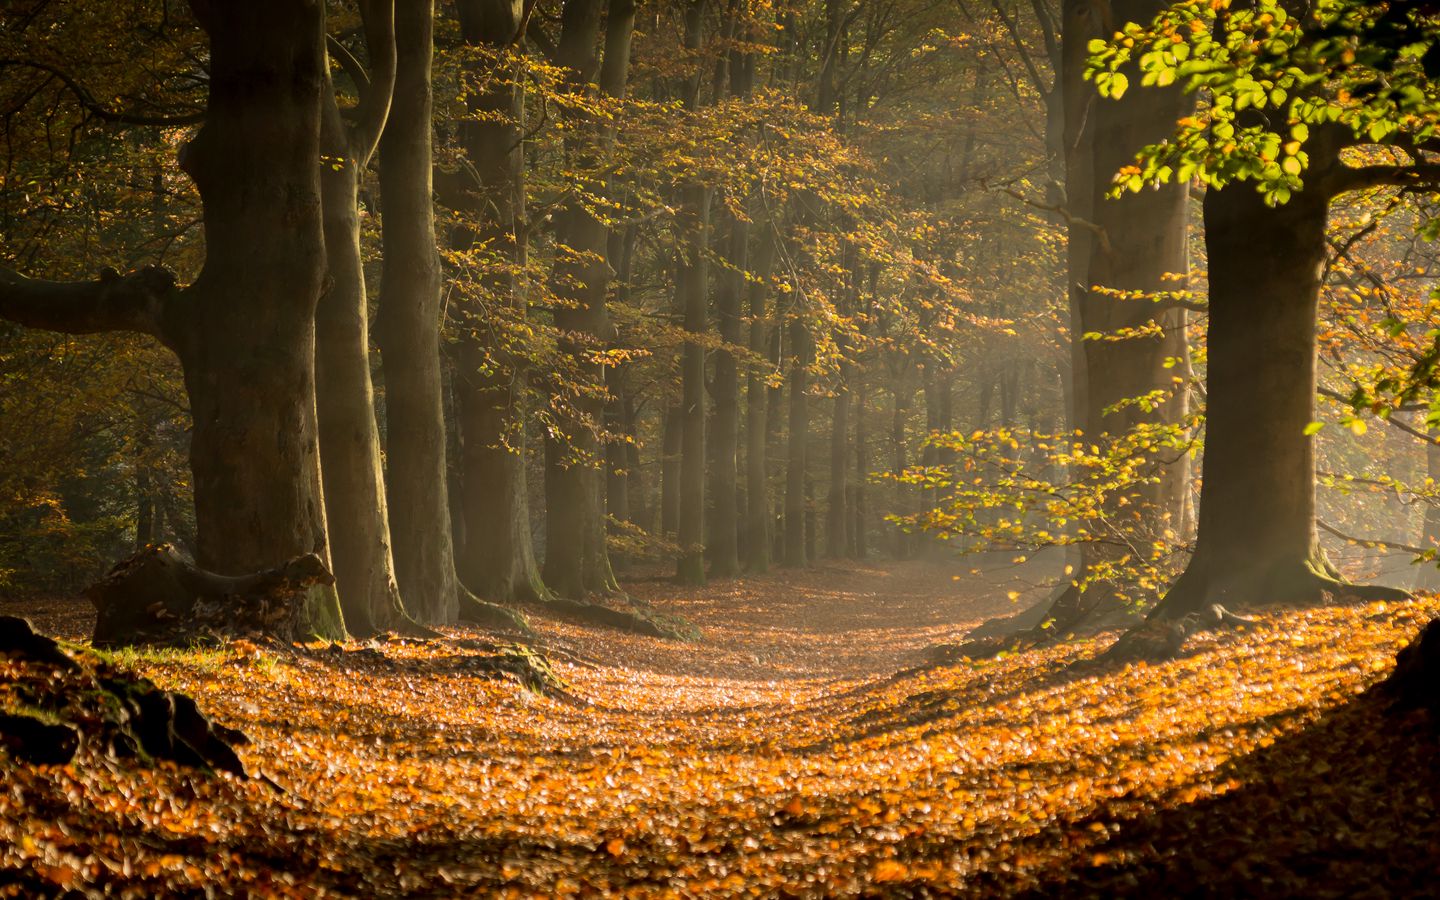 Download wallpaper 1440x900 forest, path, foliage, branches widescreen ...